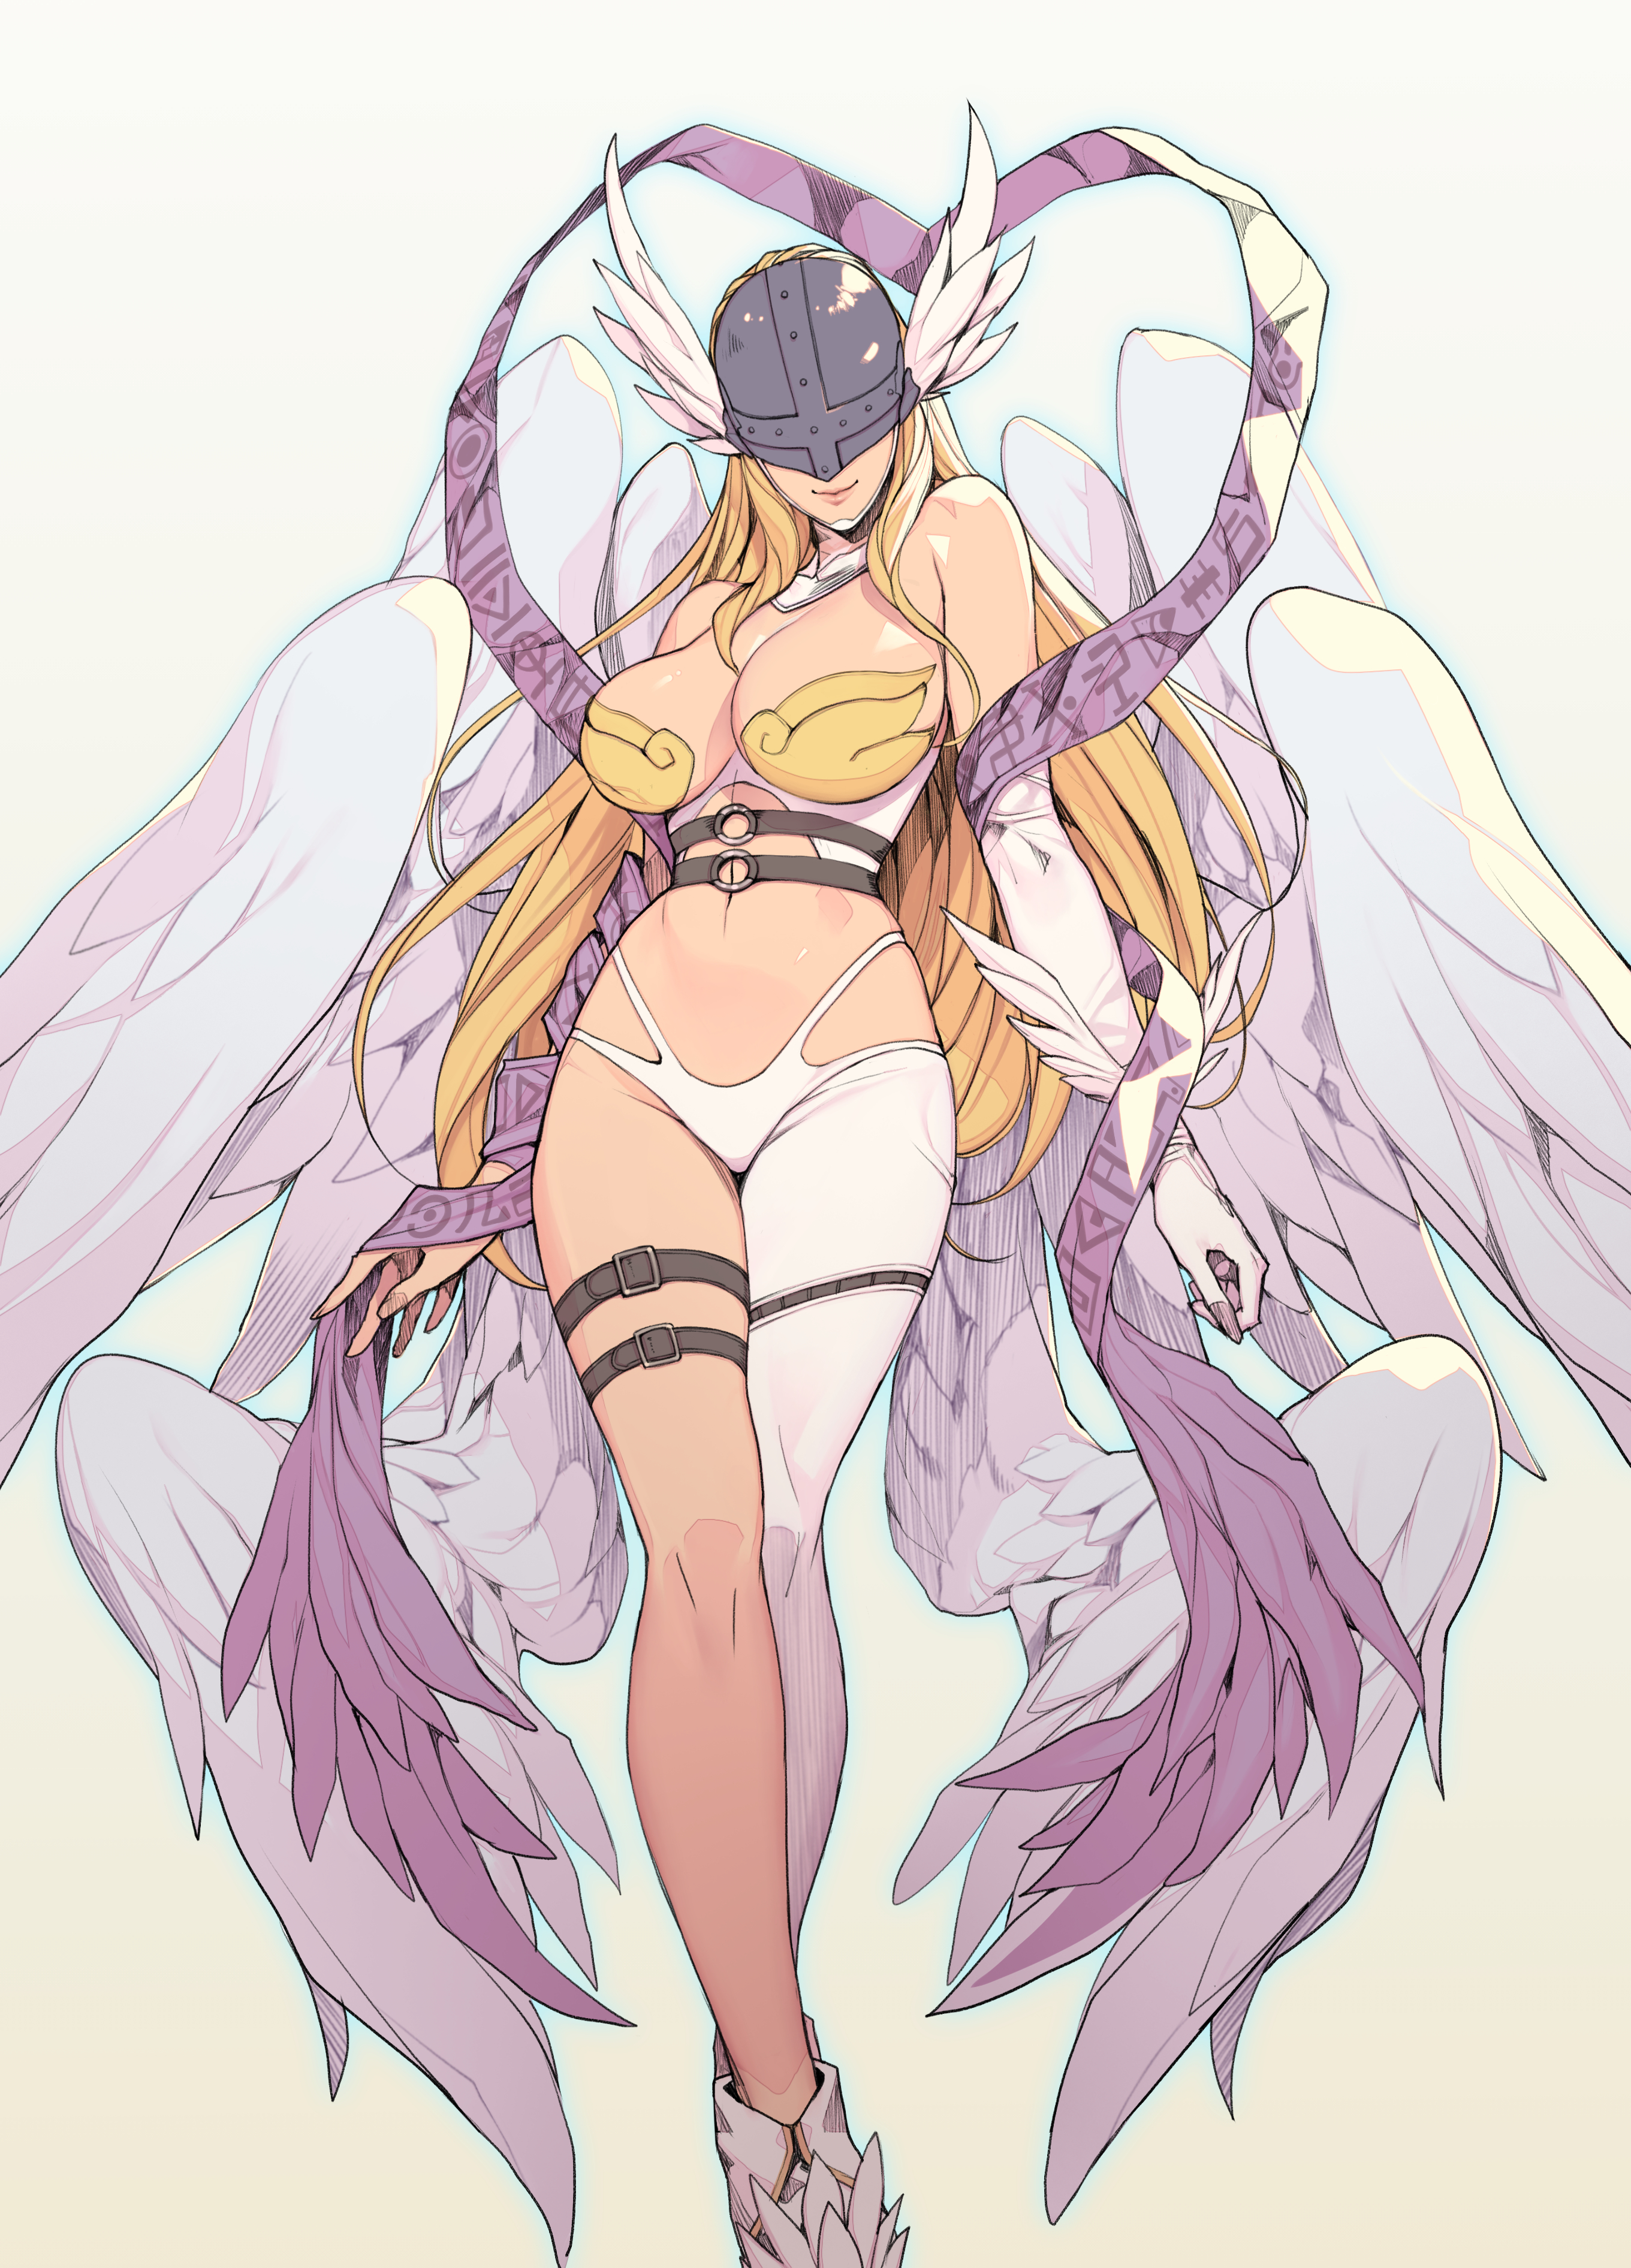 Anime 2721x3784 anime girls Oda Non angewomon Digimon big boobs blonde long hair smiling belly wings angel portrait display legs skimpy clothes mask angel girl